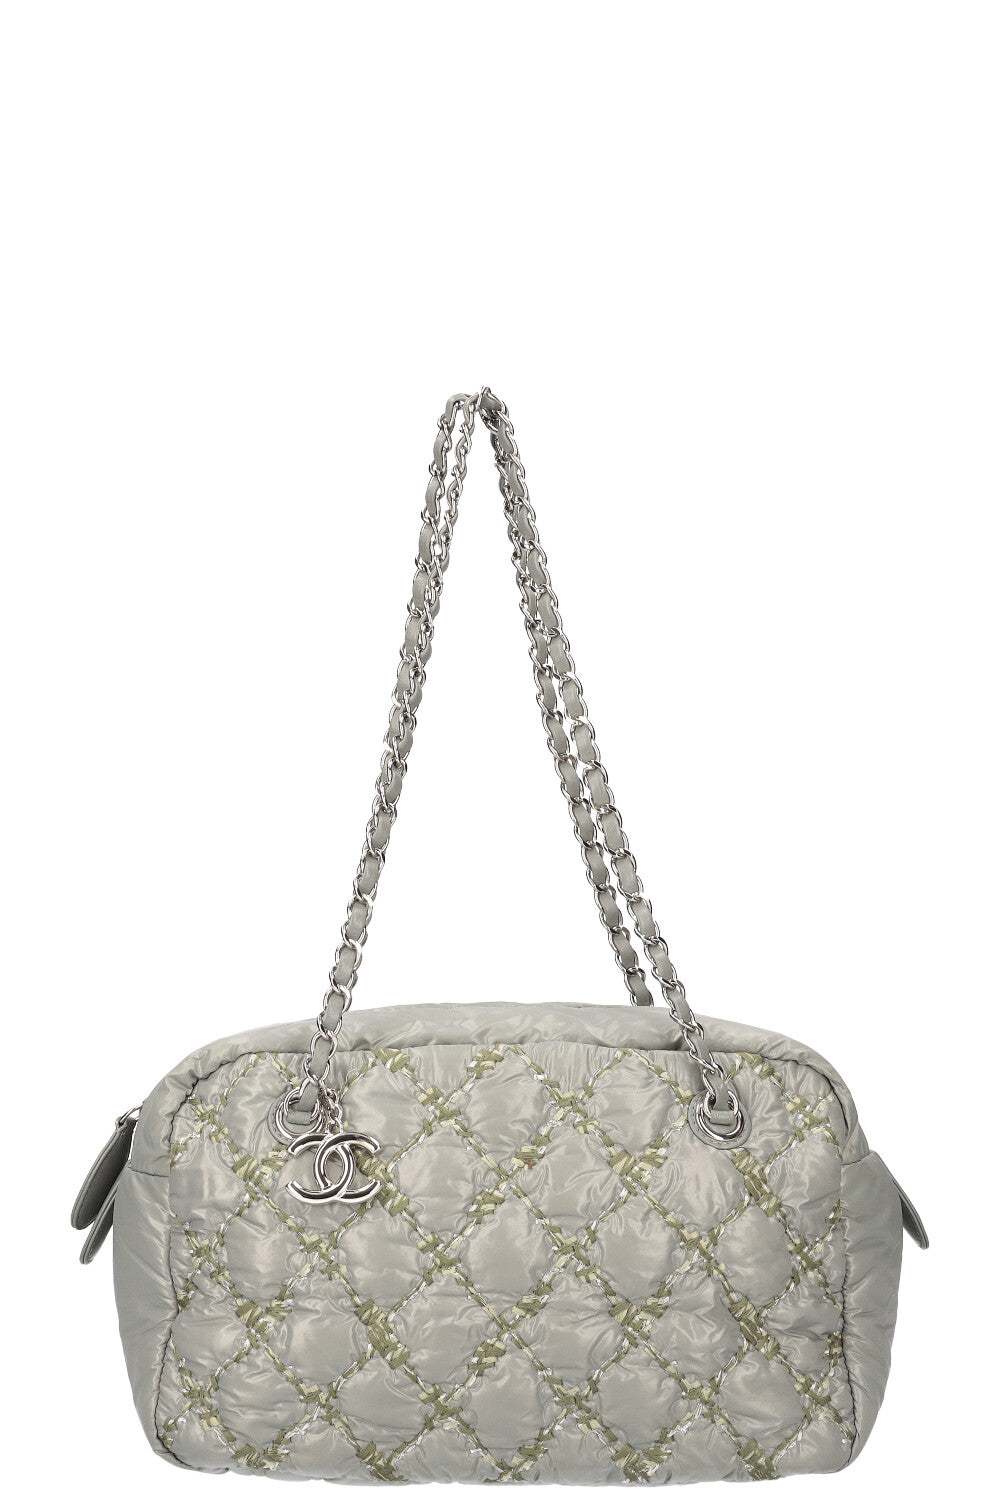 CHANEL Quilted Bubble Nylon Tweed Stitch Bag Grey